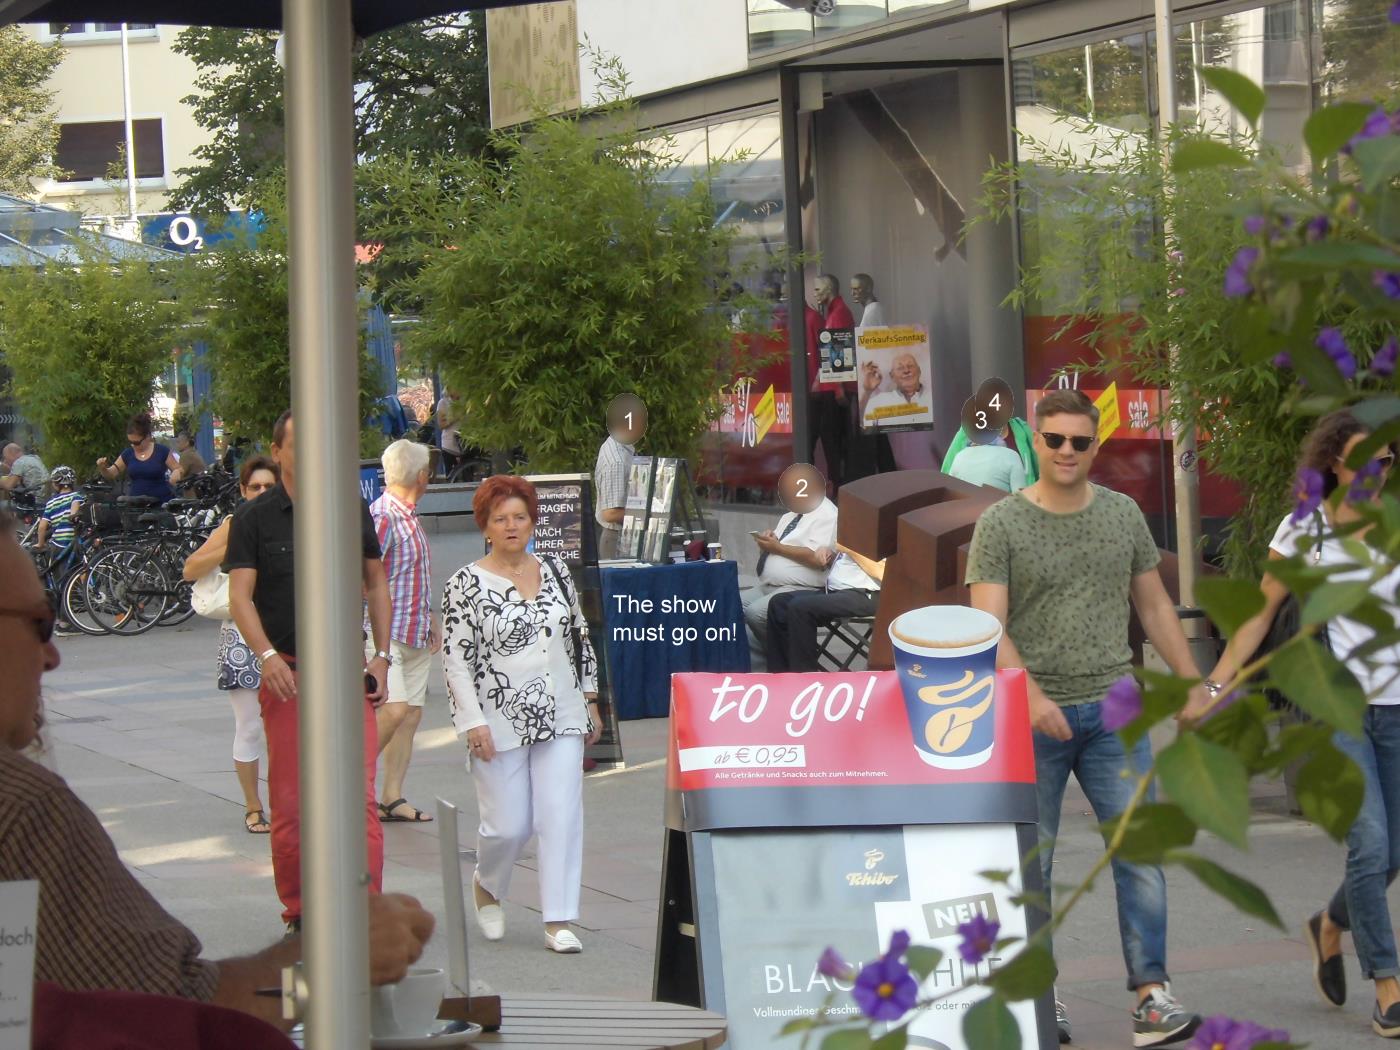 Jehovah's Witnesses stand around Bruchsal. The Show must go on.